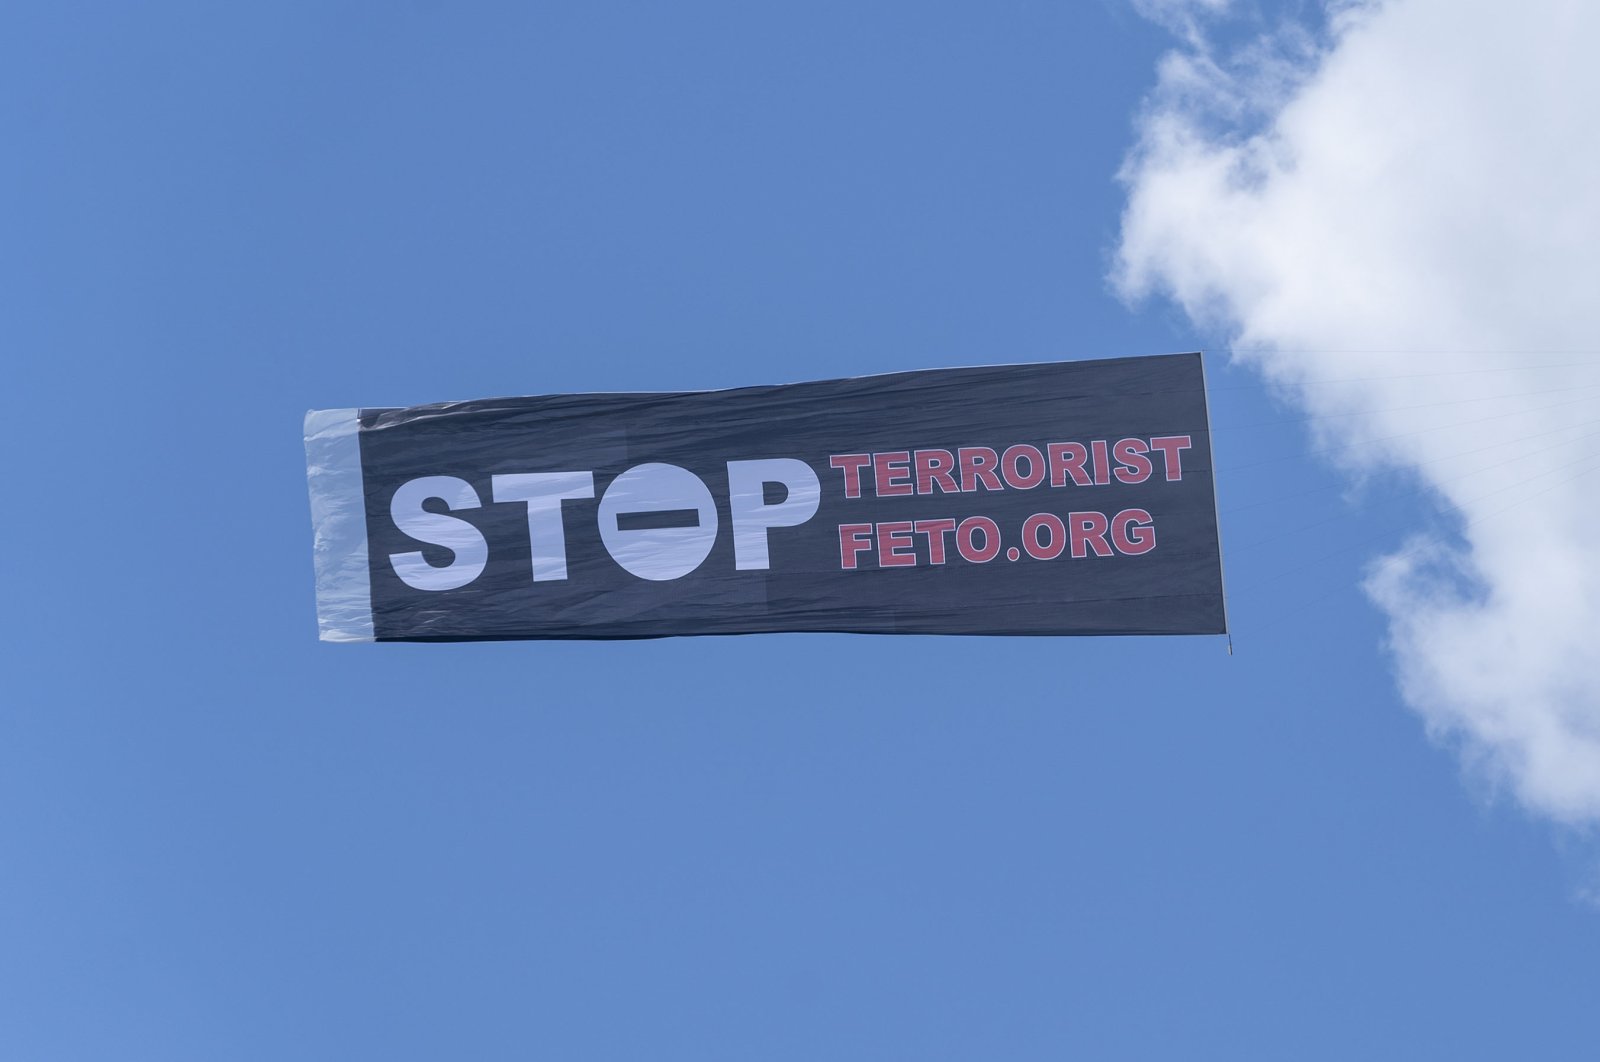 The Turkish community in New York City lifts banner against the Gülenist Terror Group (FETÖ) on July 15, 2020, the anniversary of the failed coup in Turkey. (Getty Images)